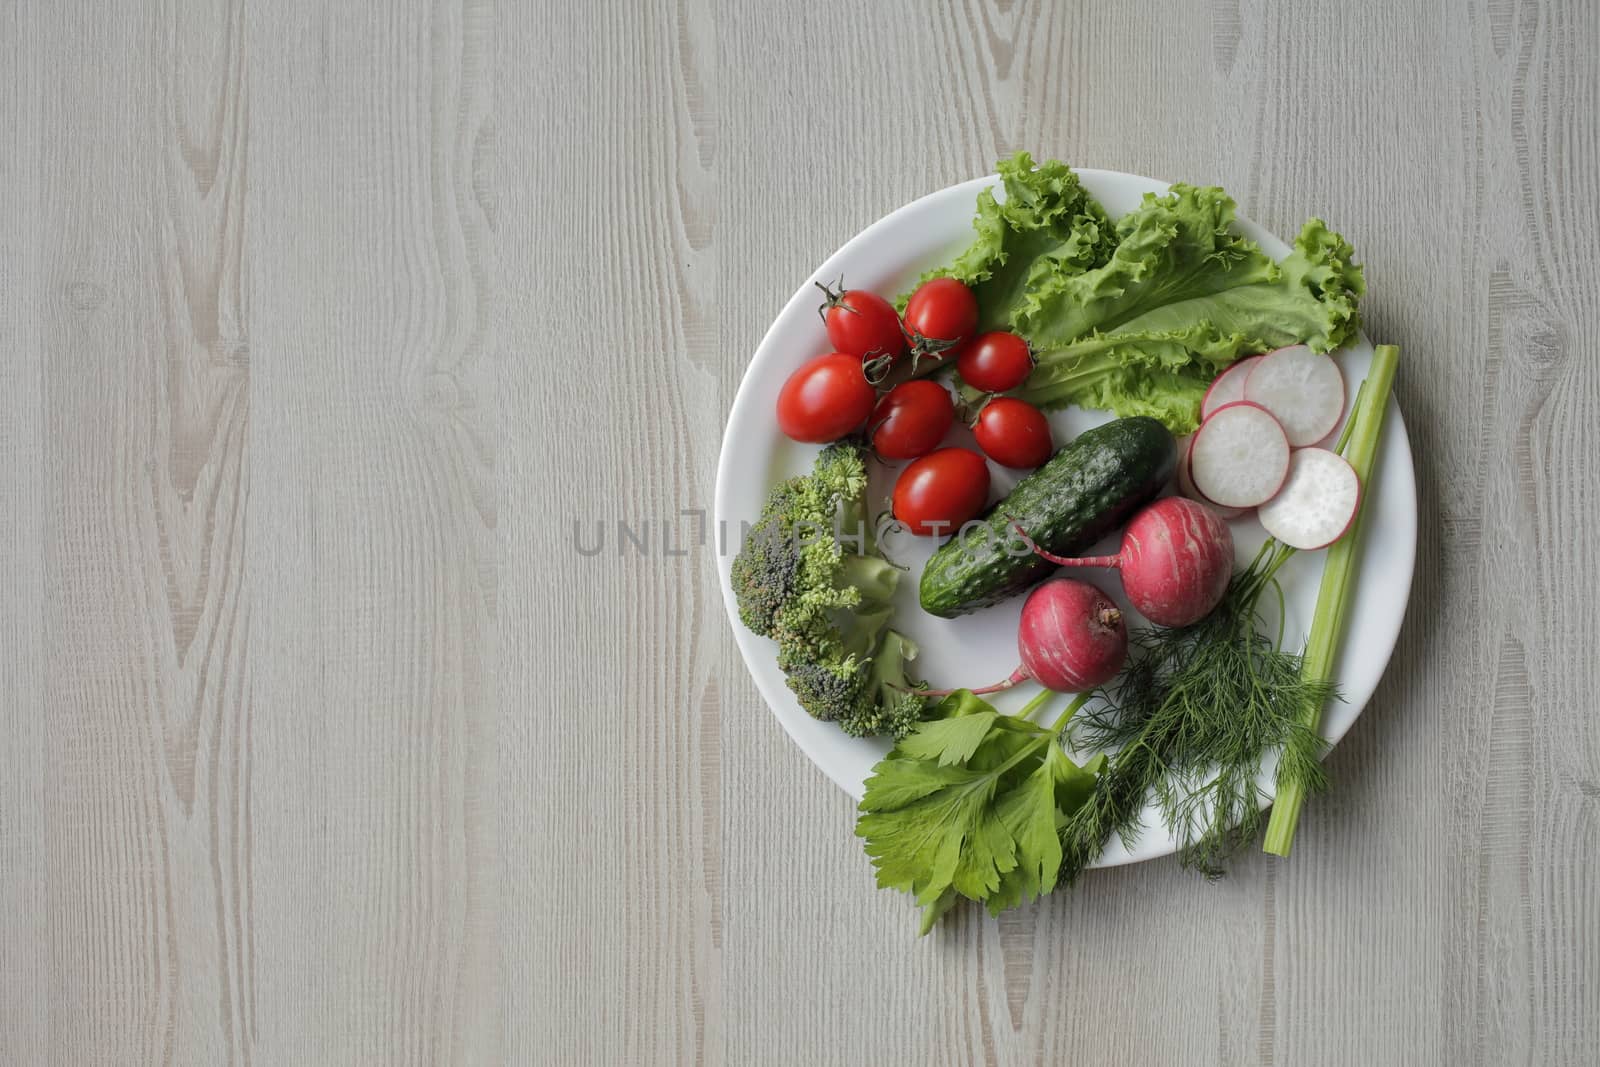 Fresh vegetables in a white plate on a light wooden table. Tomatoes, cucumber, lettuce, broccoli, radish